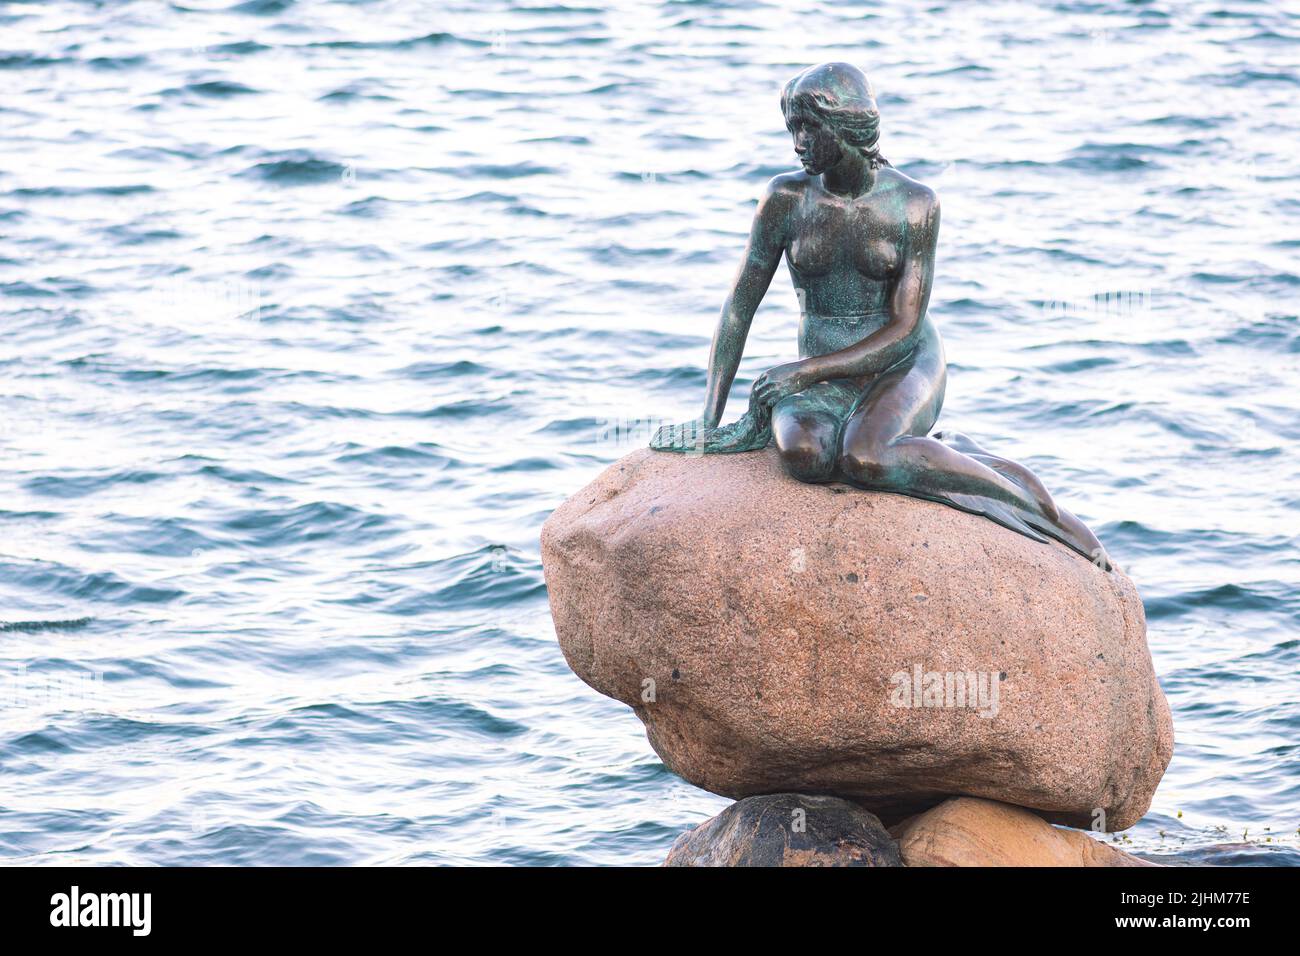 Bronze statue or sculpture of The Little Mermaid displayed on a rock by ...